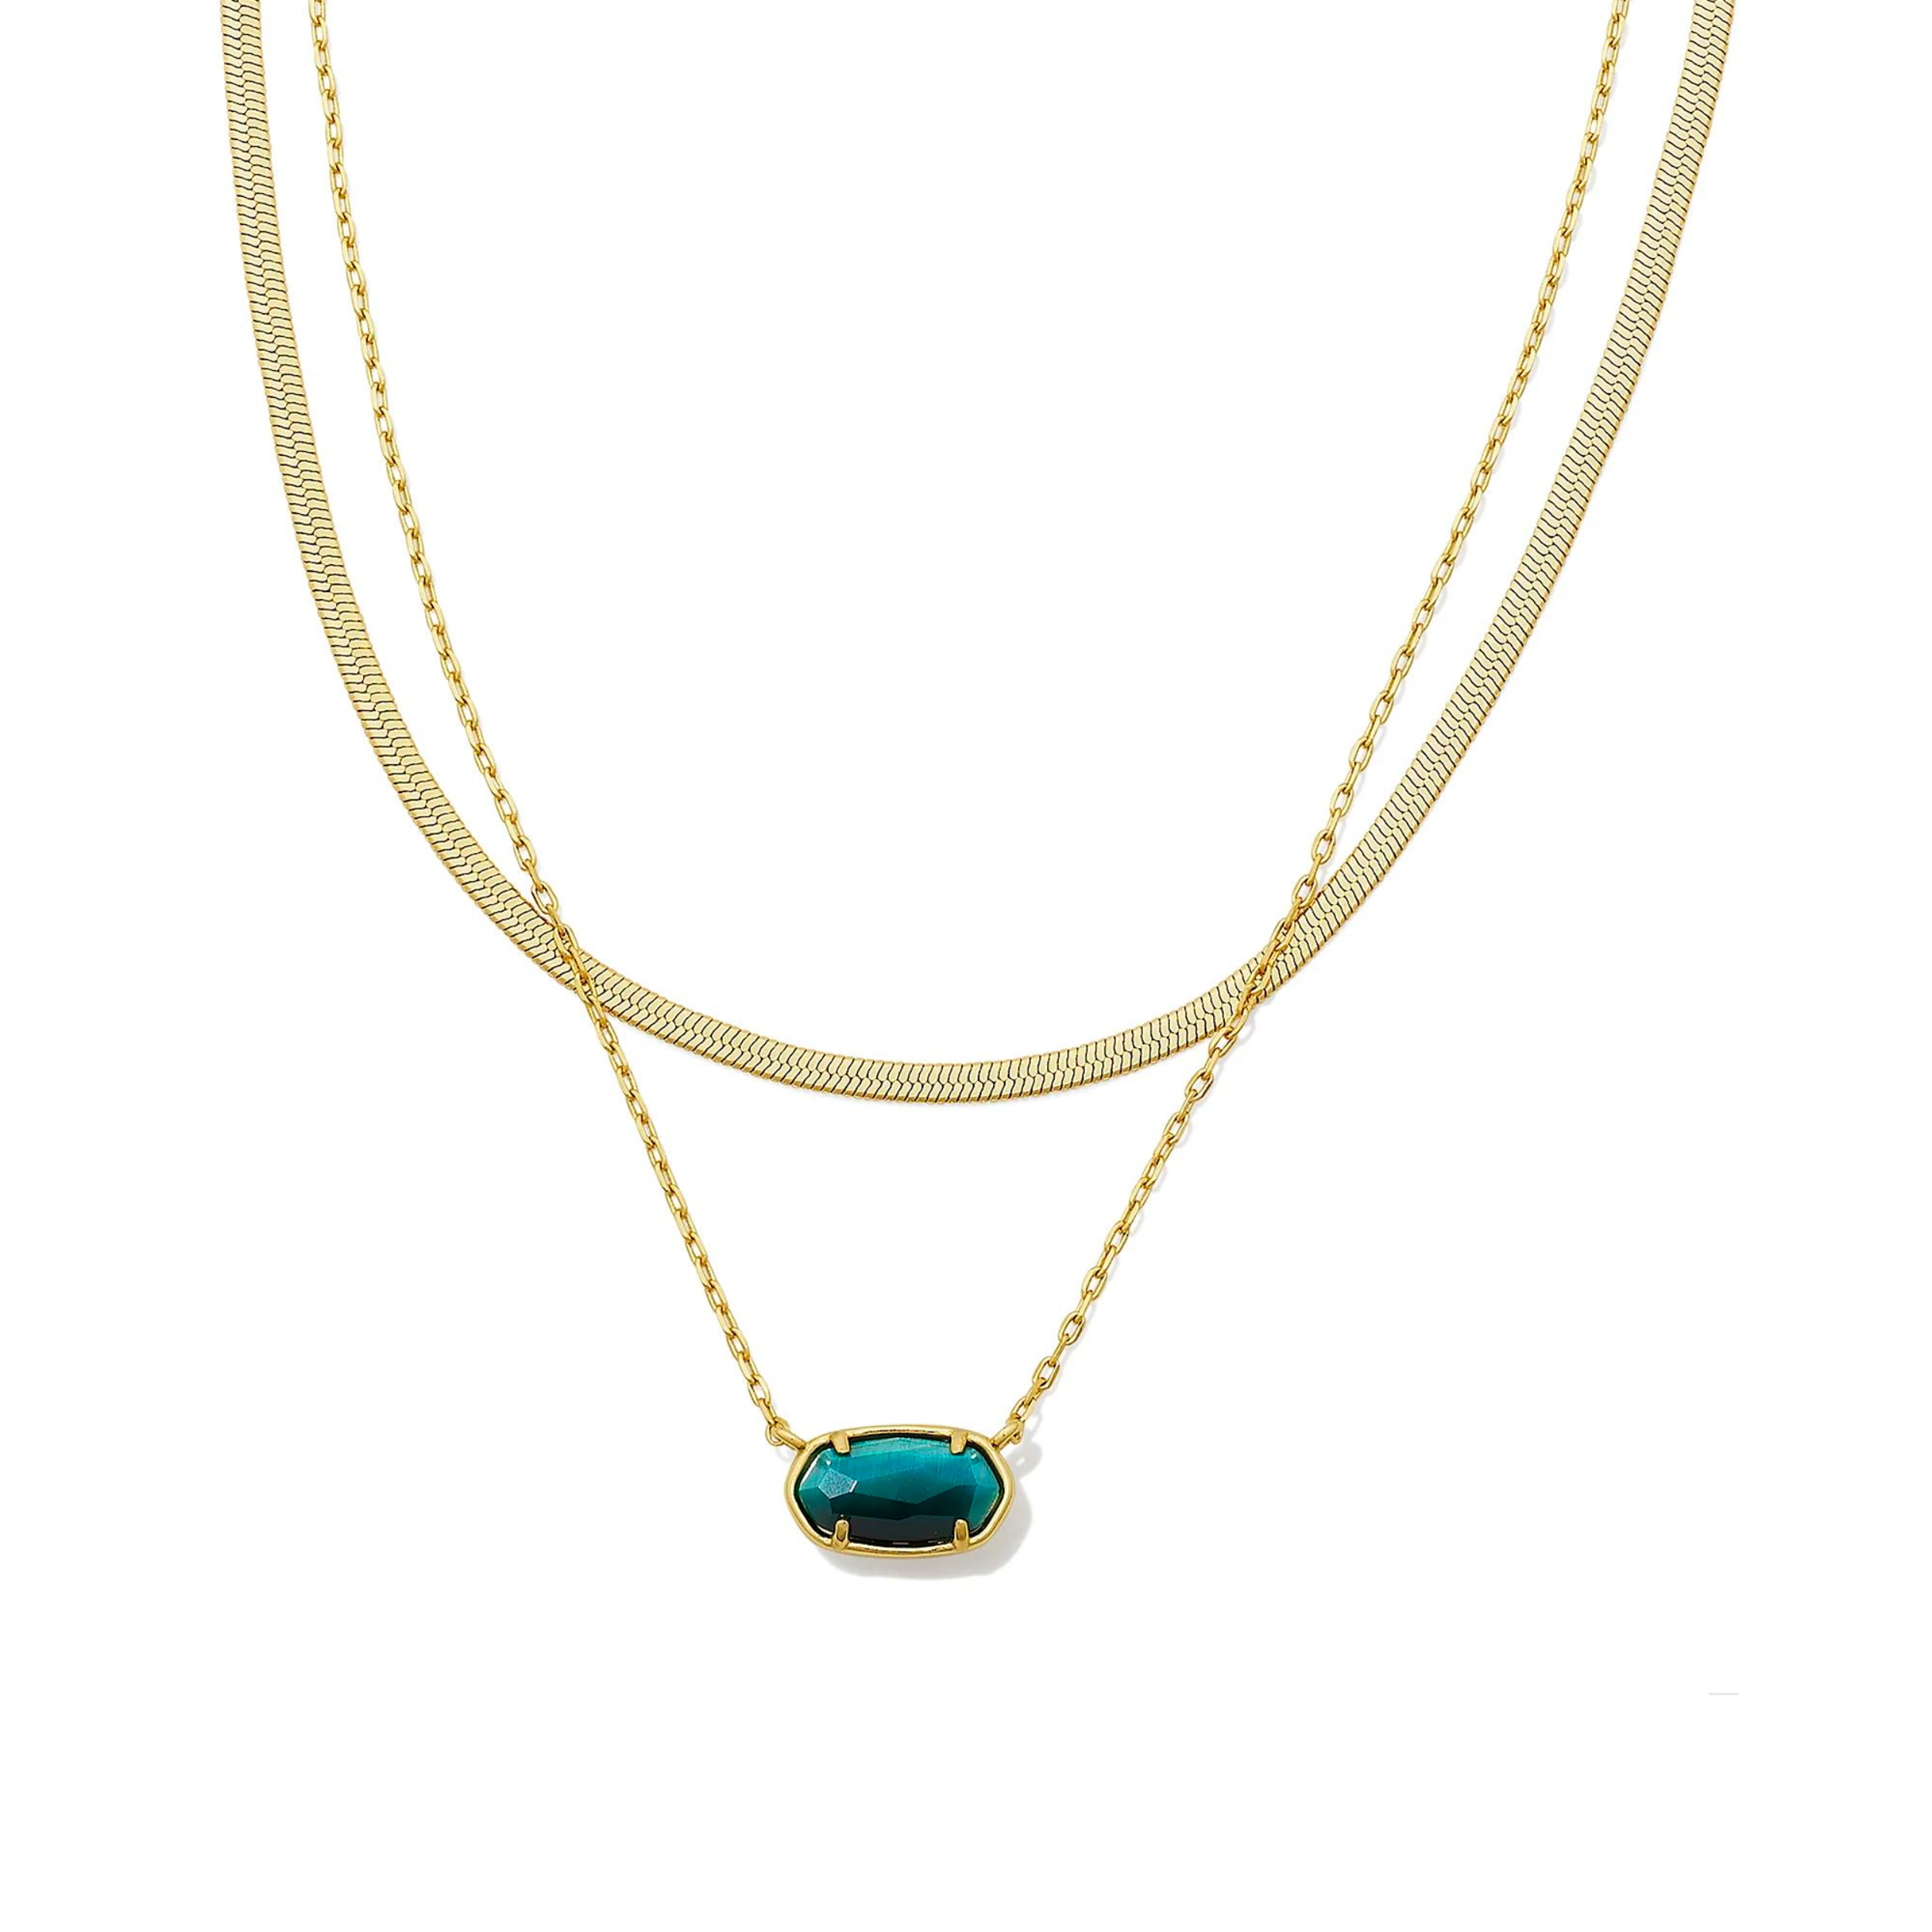 Pictured is a two strand chain necklace with an oval teal tiger's eye pendant. This necklace is pictured on a white background.    